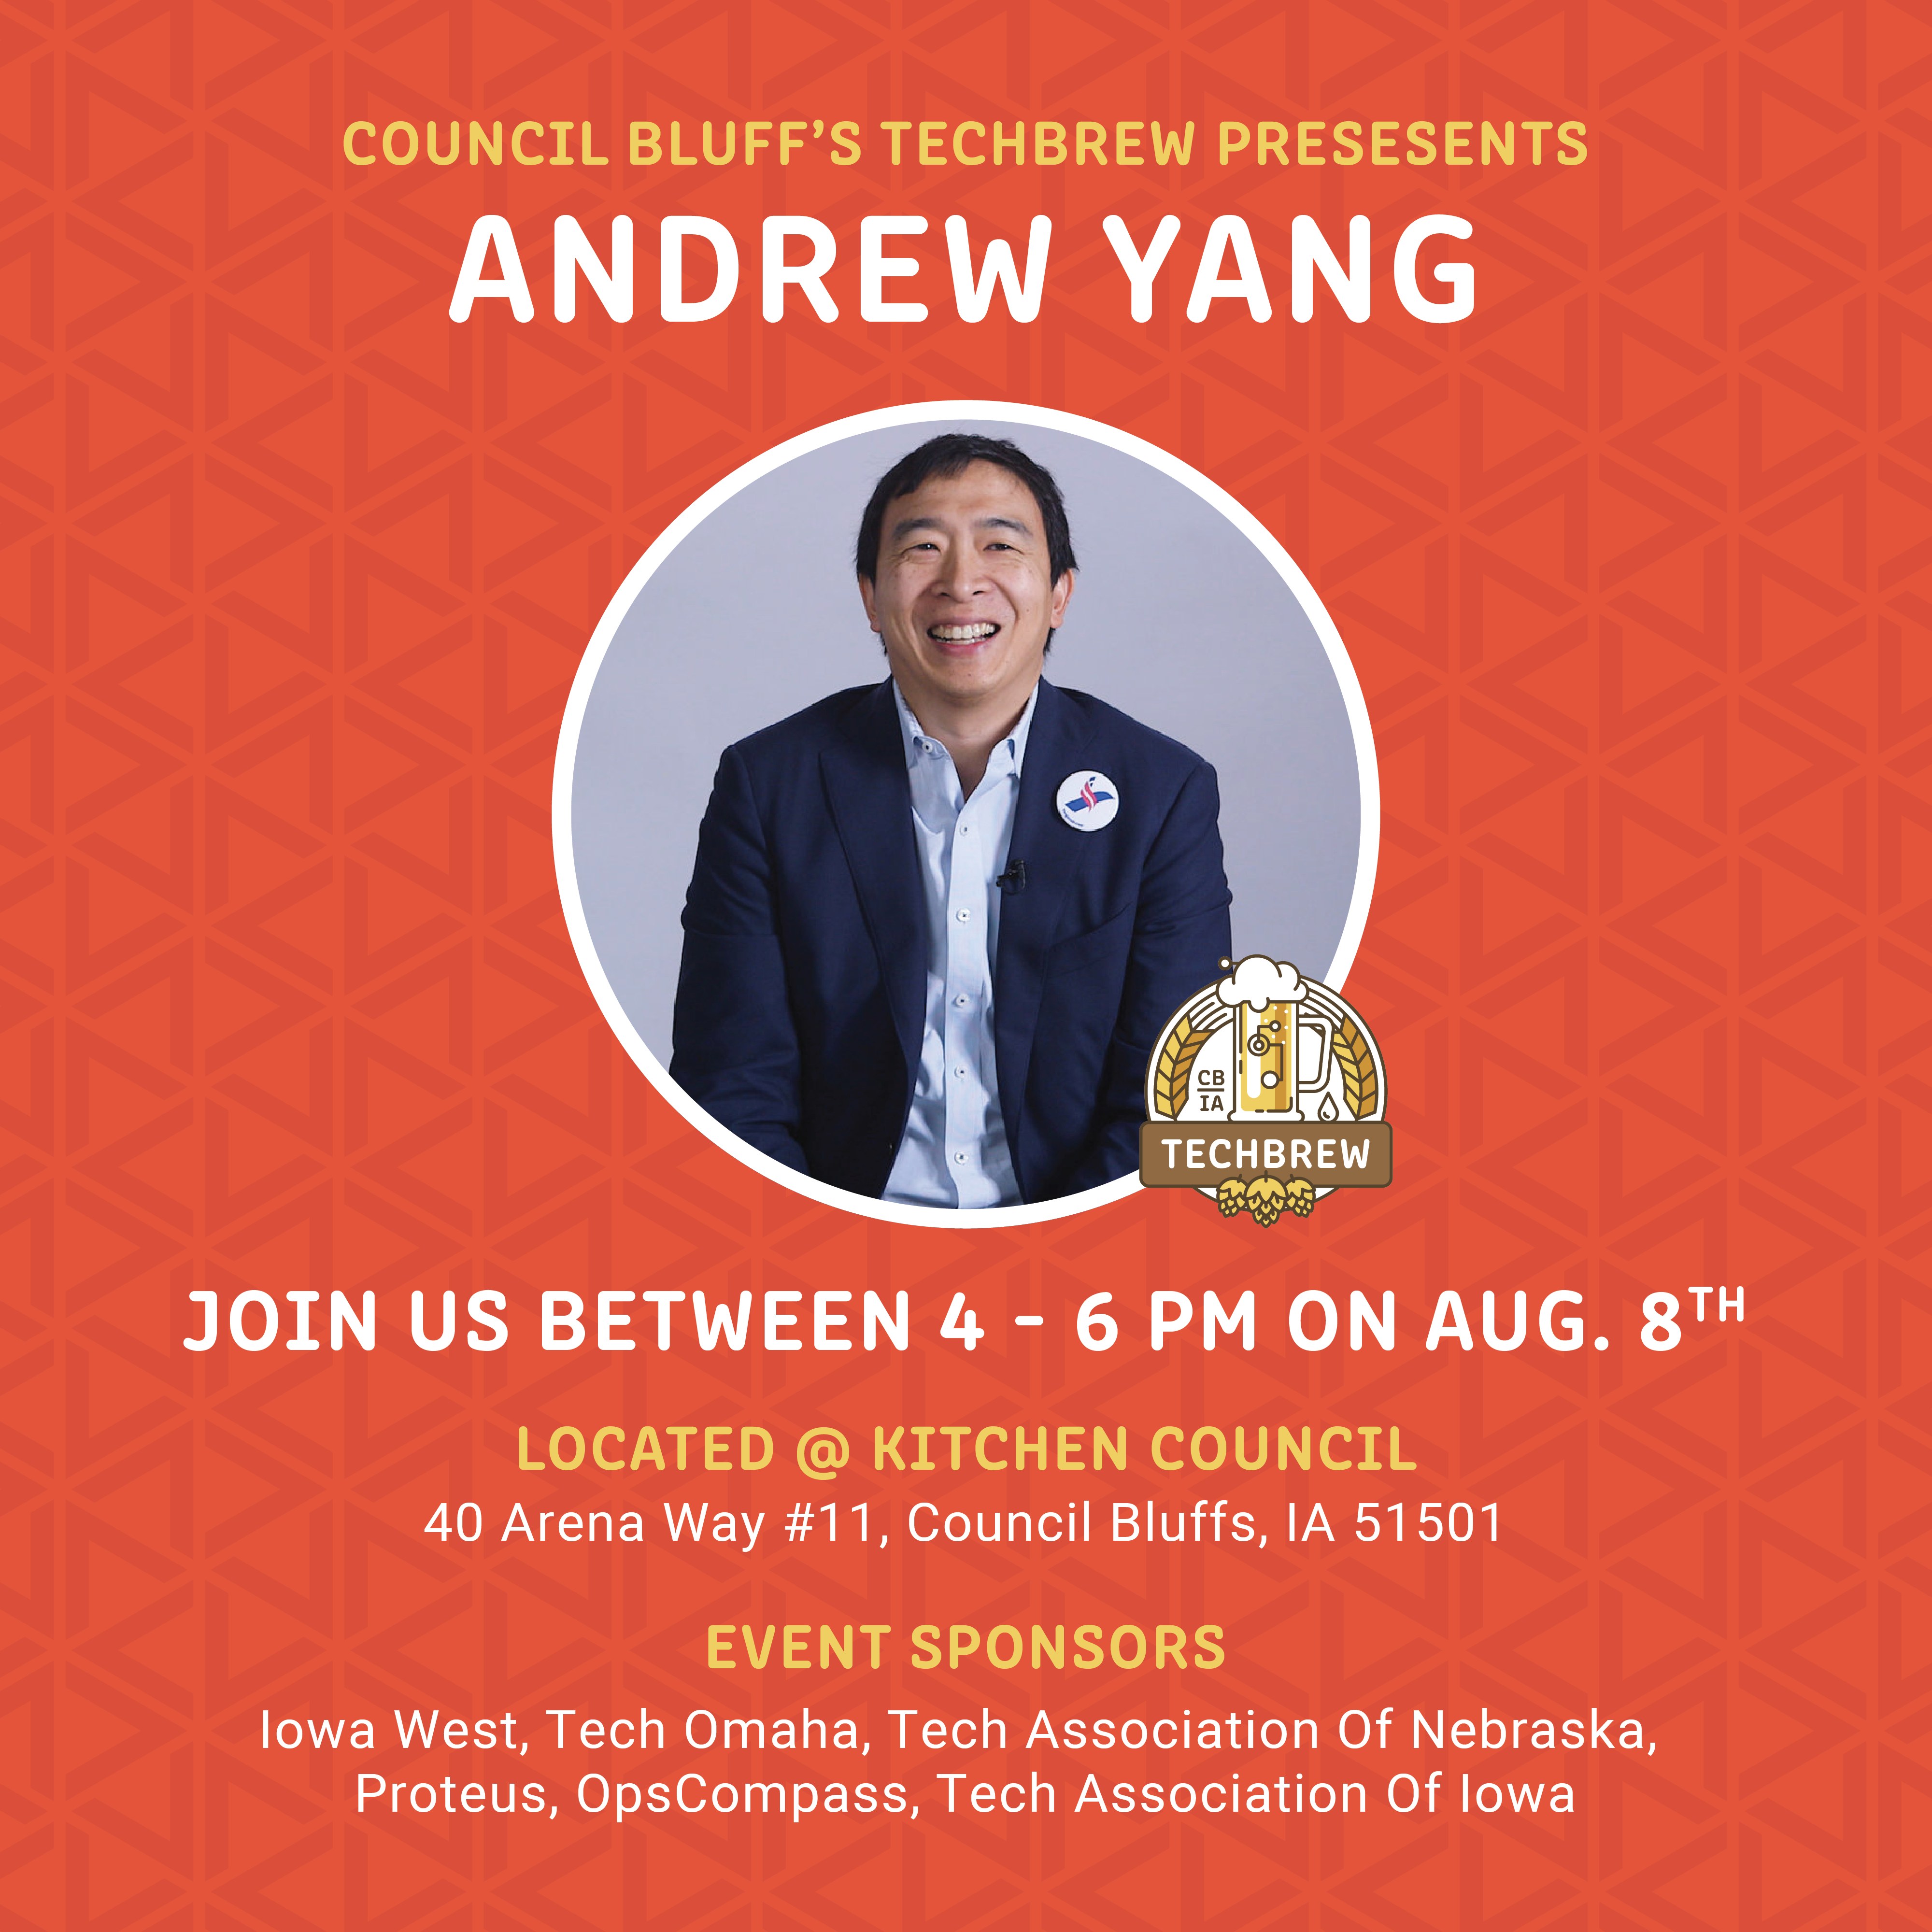 Andrew Yang to speak at Council Bluffs Tech Brew